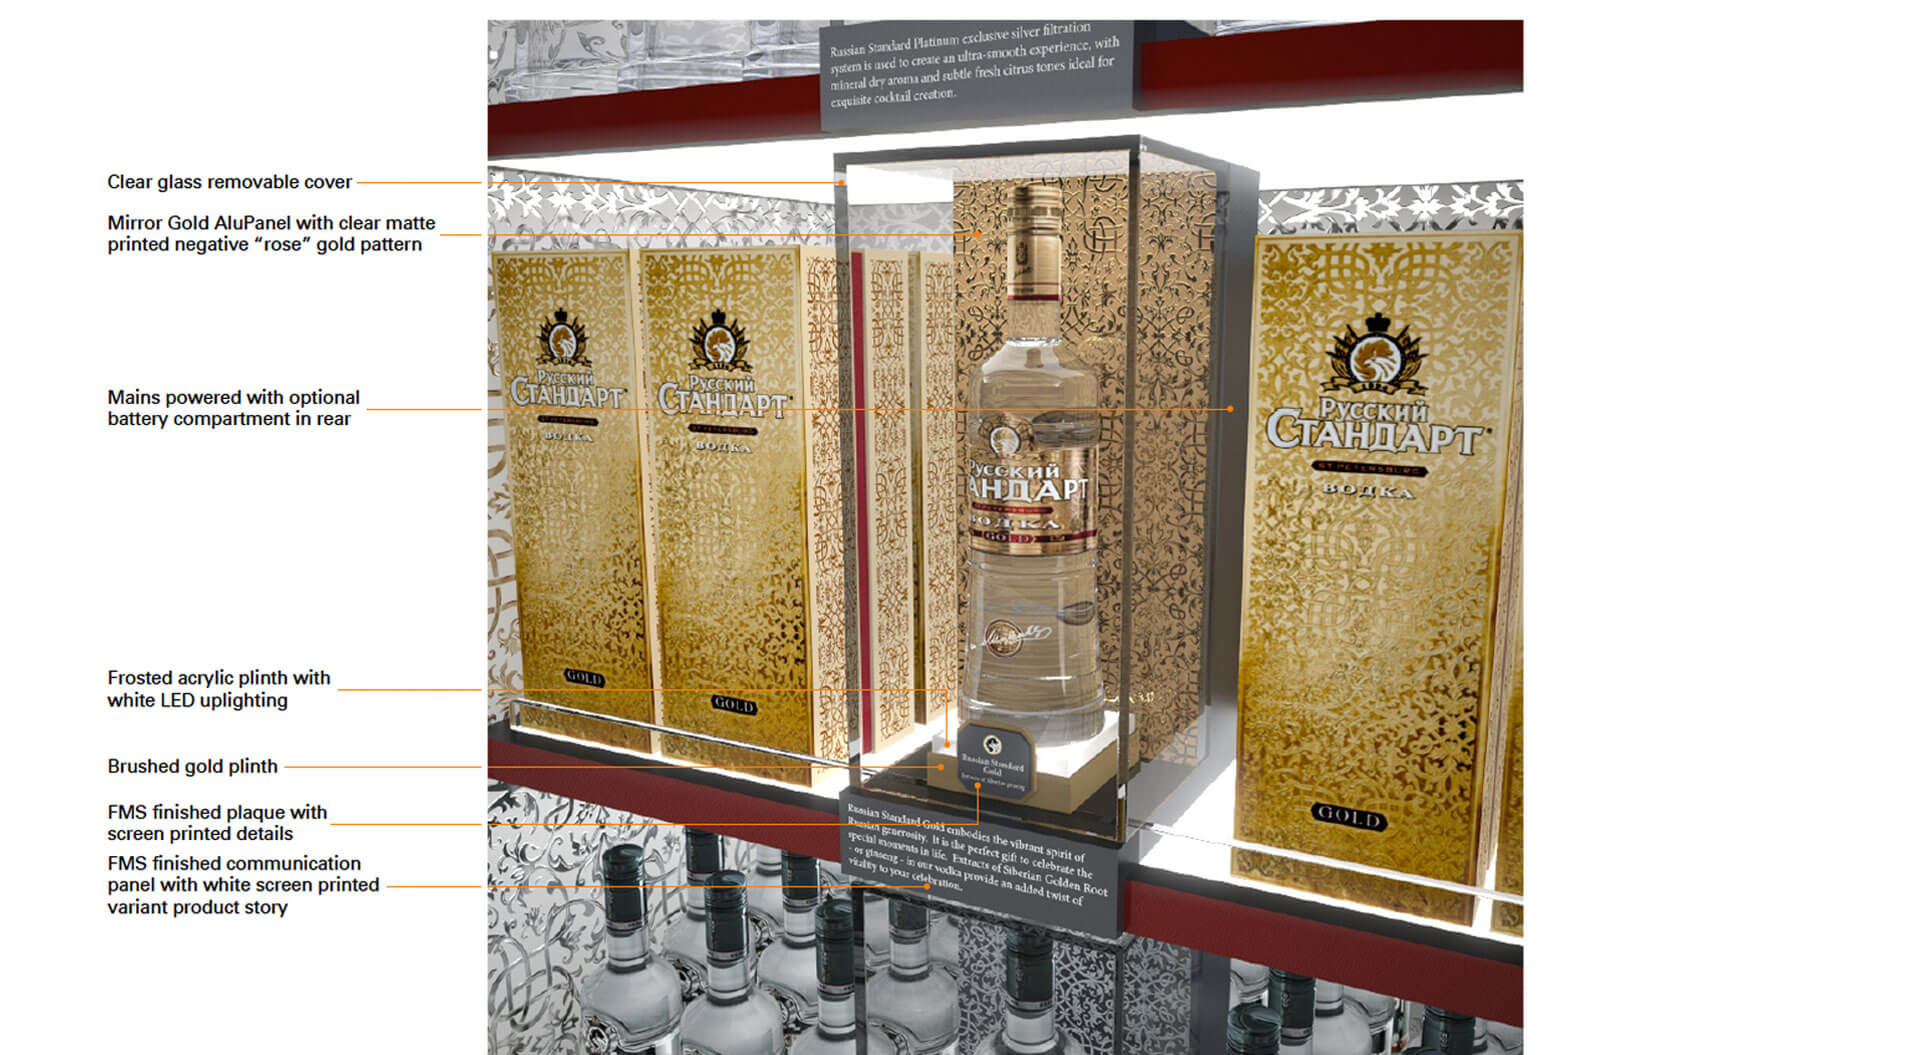 Russian Standard Vodka Gold promotion travel retail, marketing, merchandising design, airports, duty-free alcohol